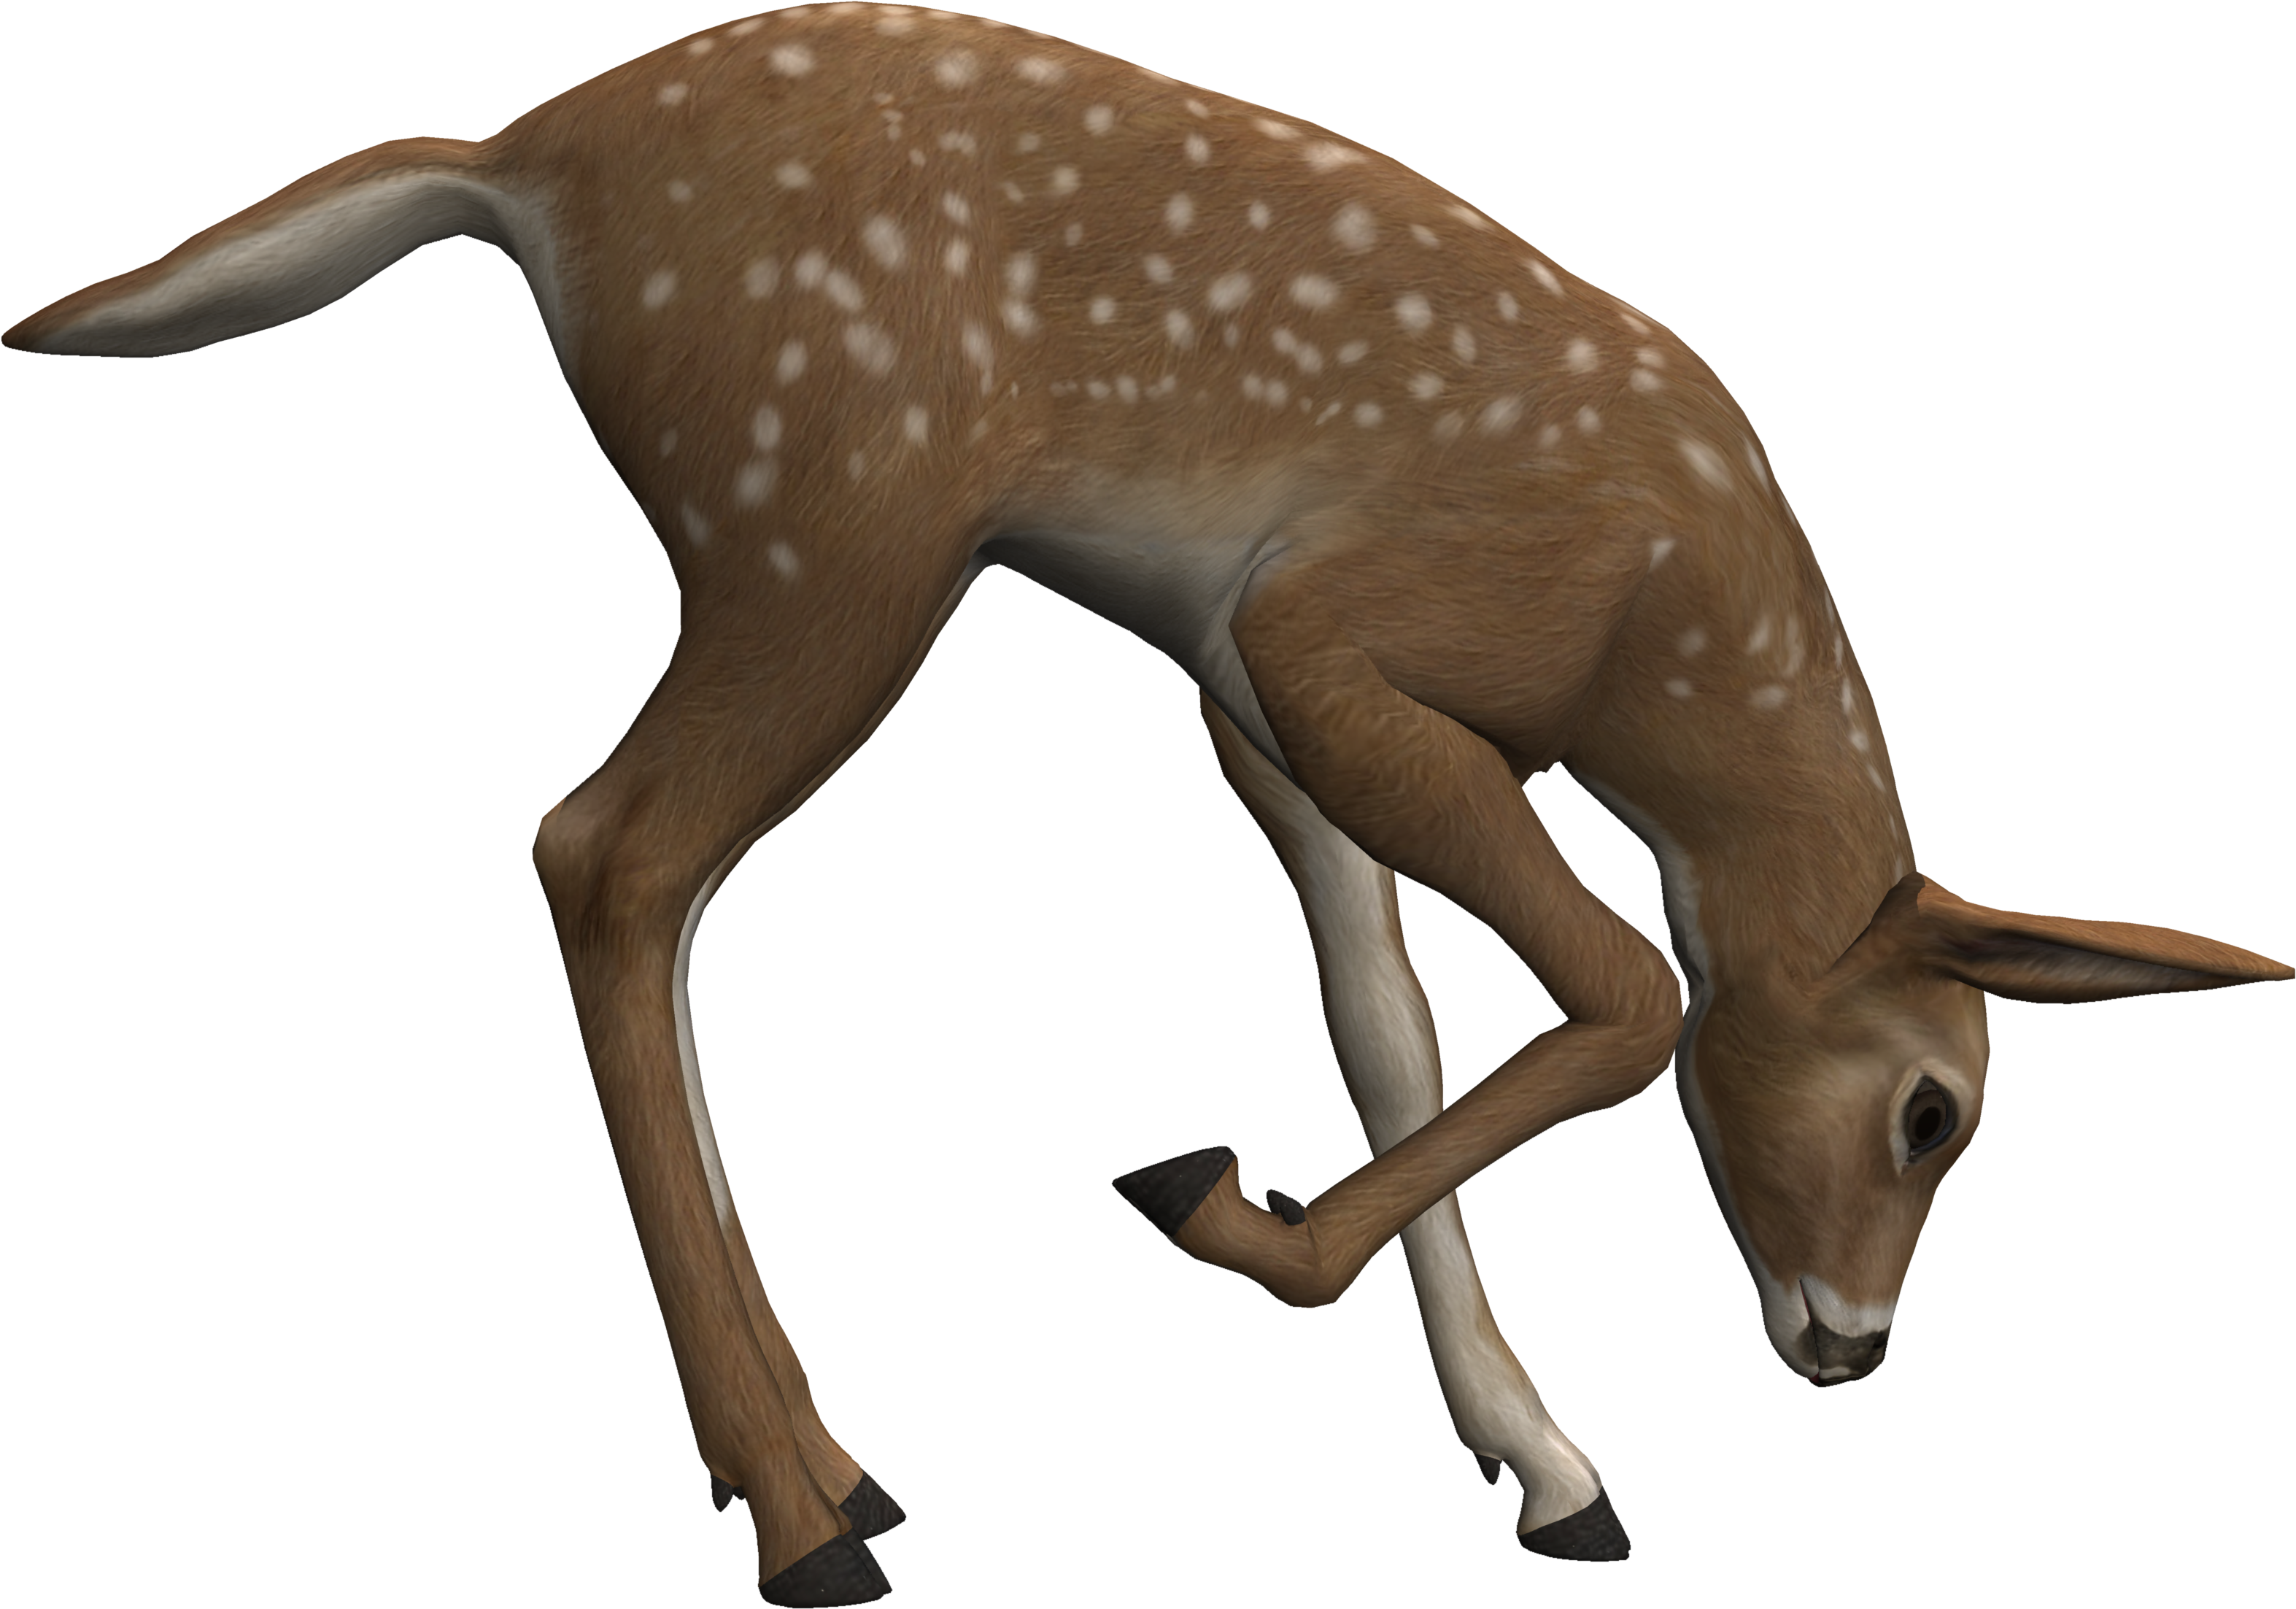 A Deer With White Spots On Its Legs